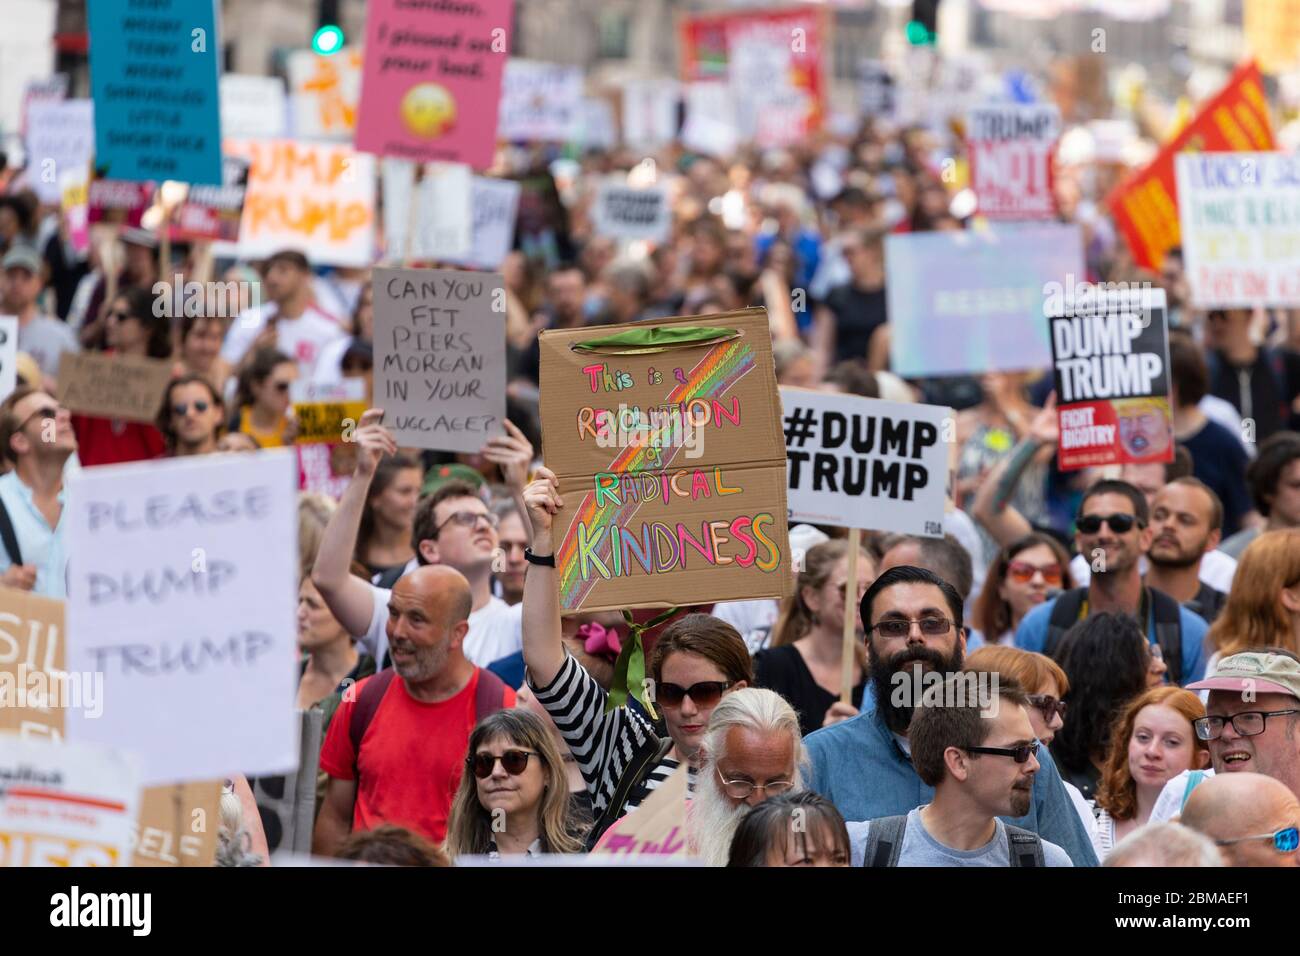 A woman holding up a sign reading 'This is a Revolution of Radical Kindness' at the protest and demonstration against Donald Trump's visit to London Stock Photo